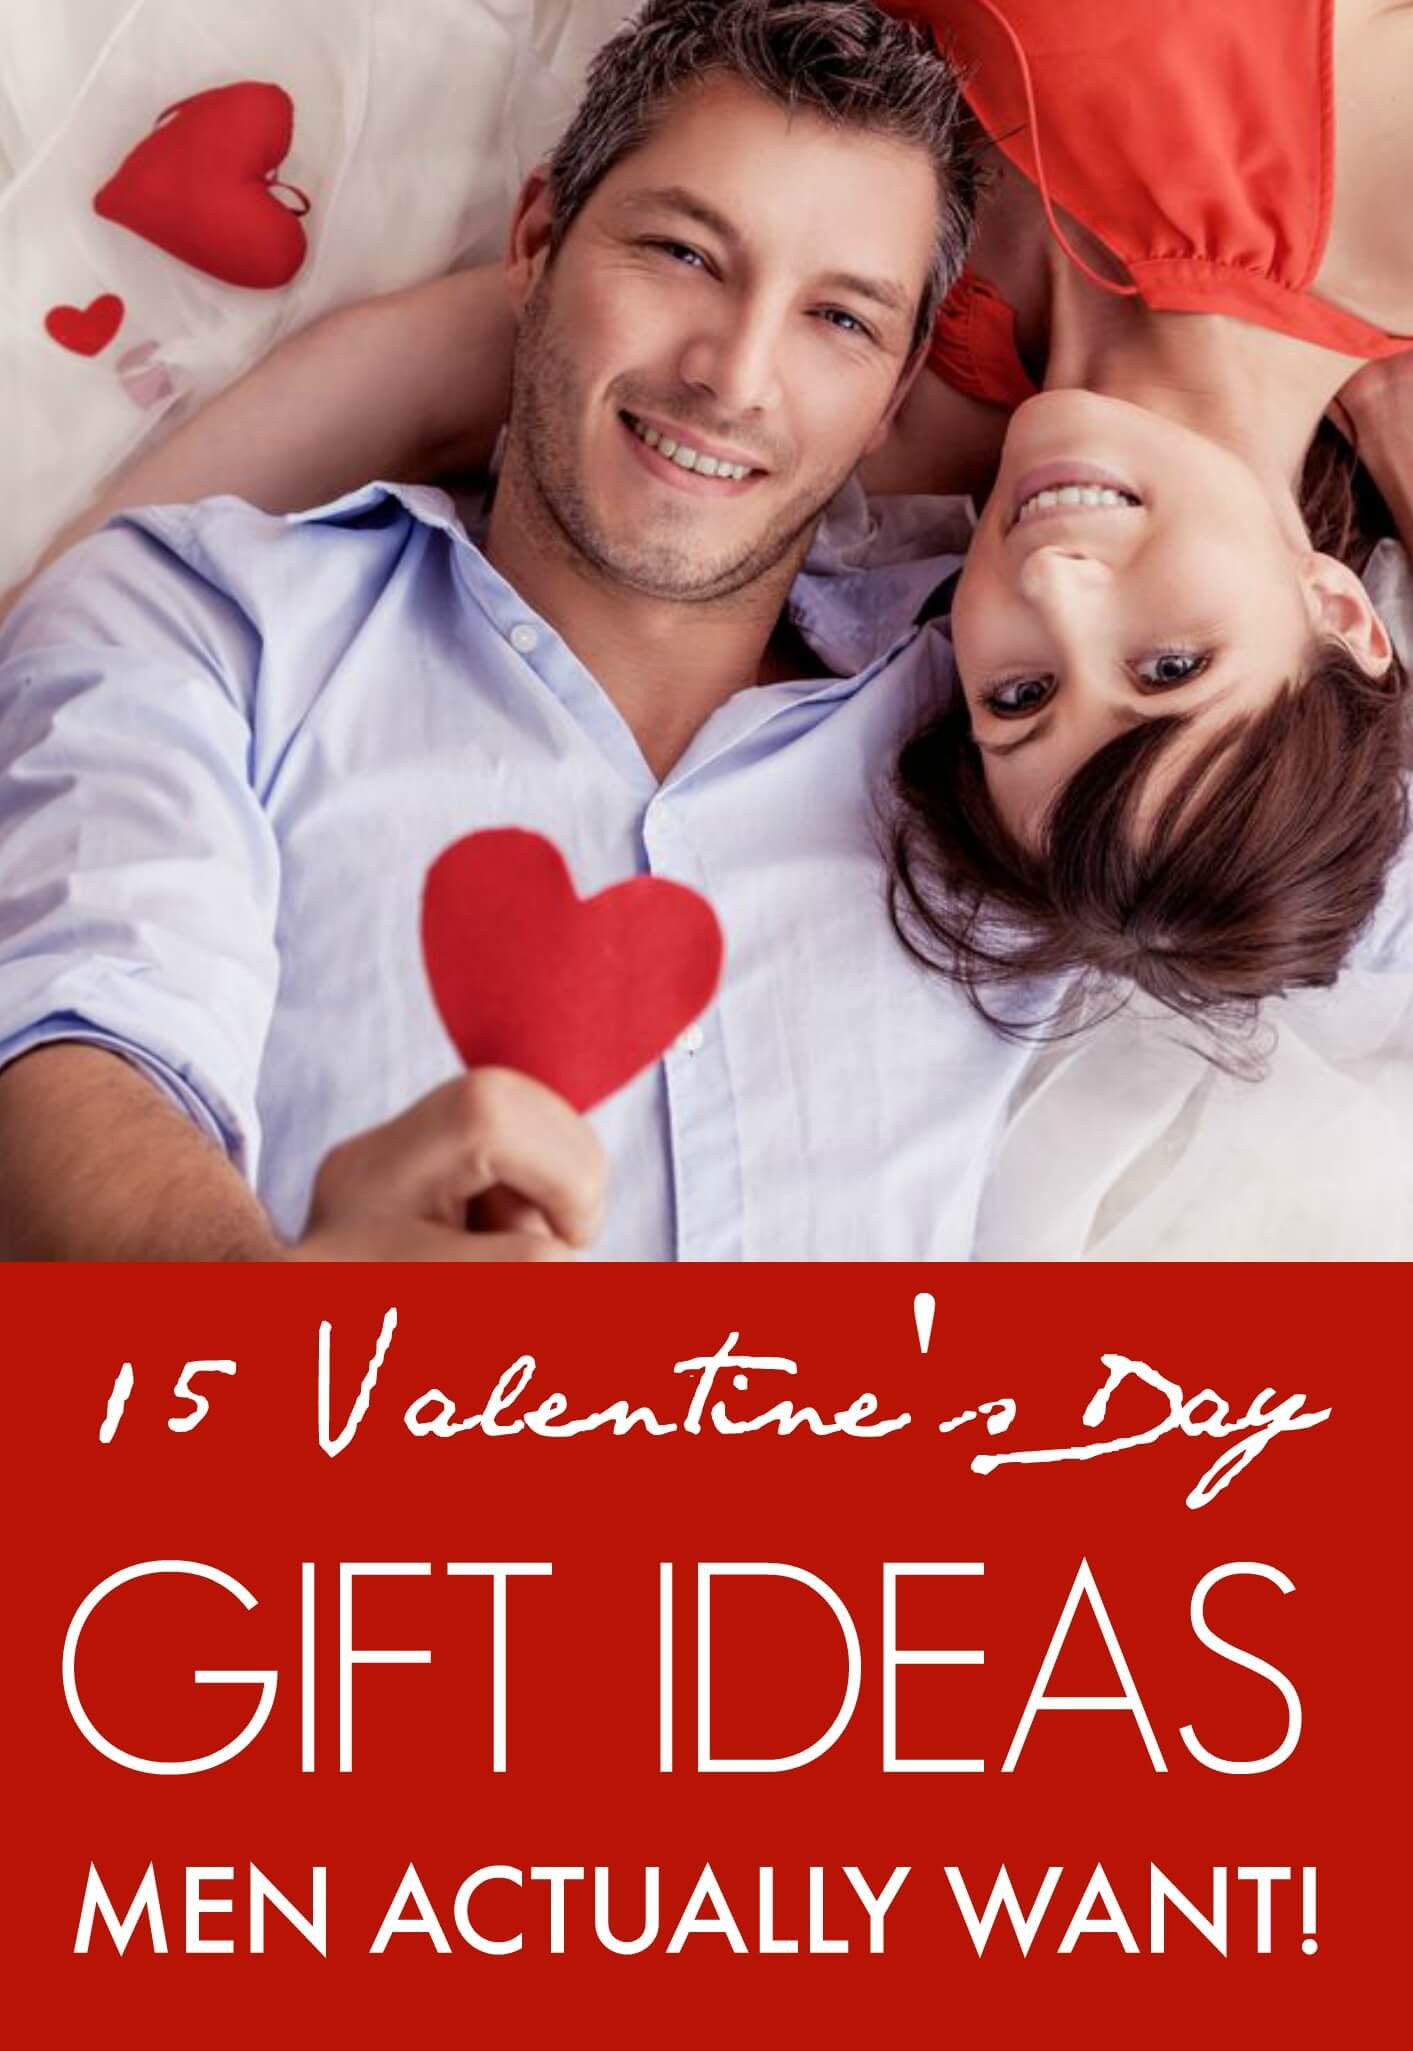 Valentines Day Gift Ideas For Men
 15 Valentine’s Day Gift ideas Men Actually Want